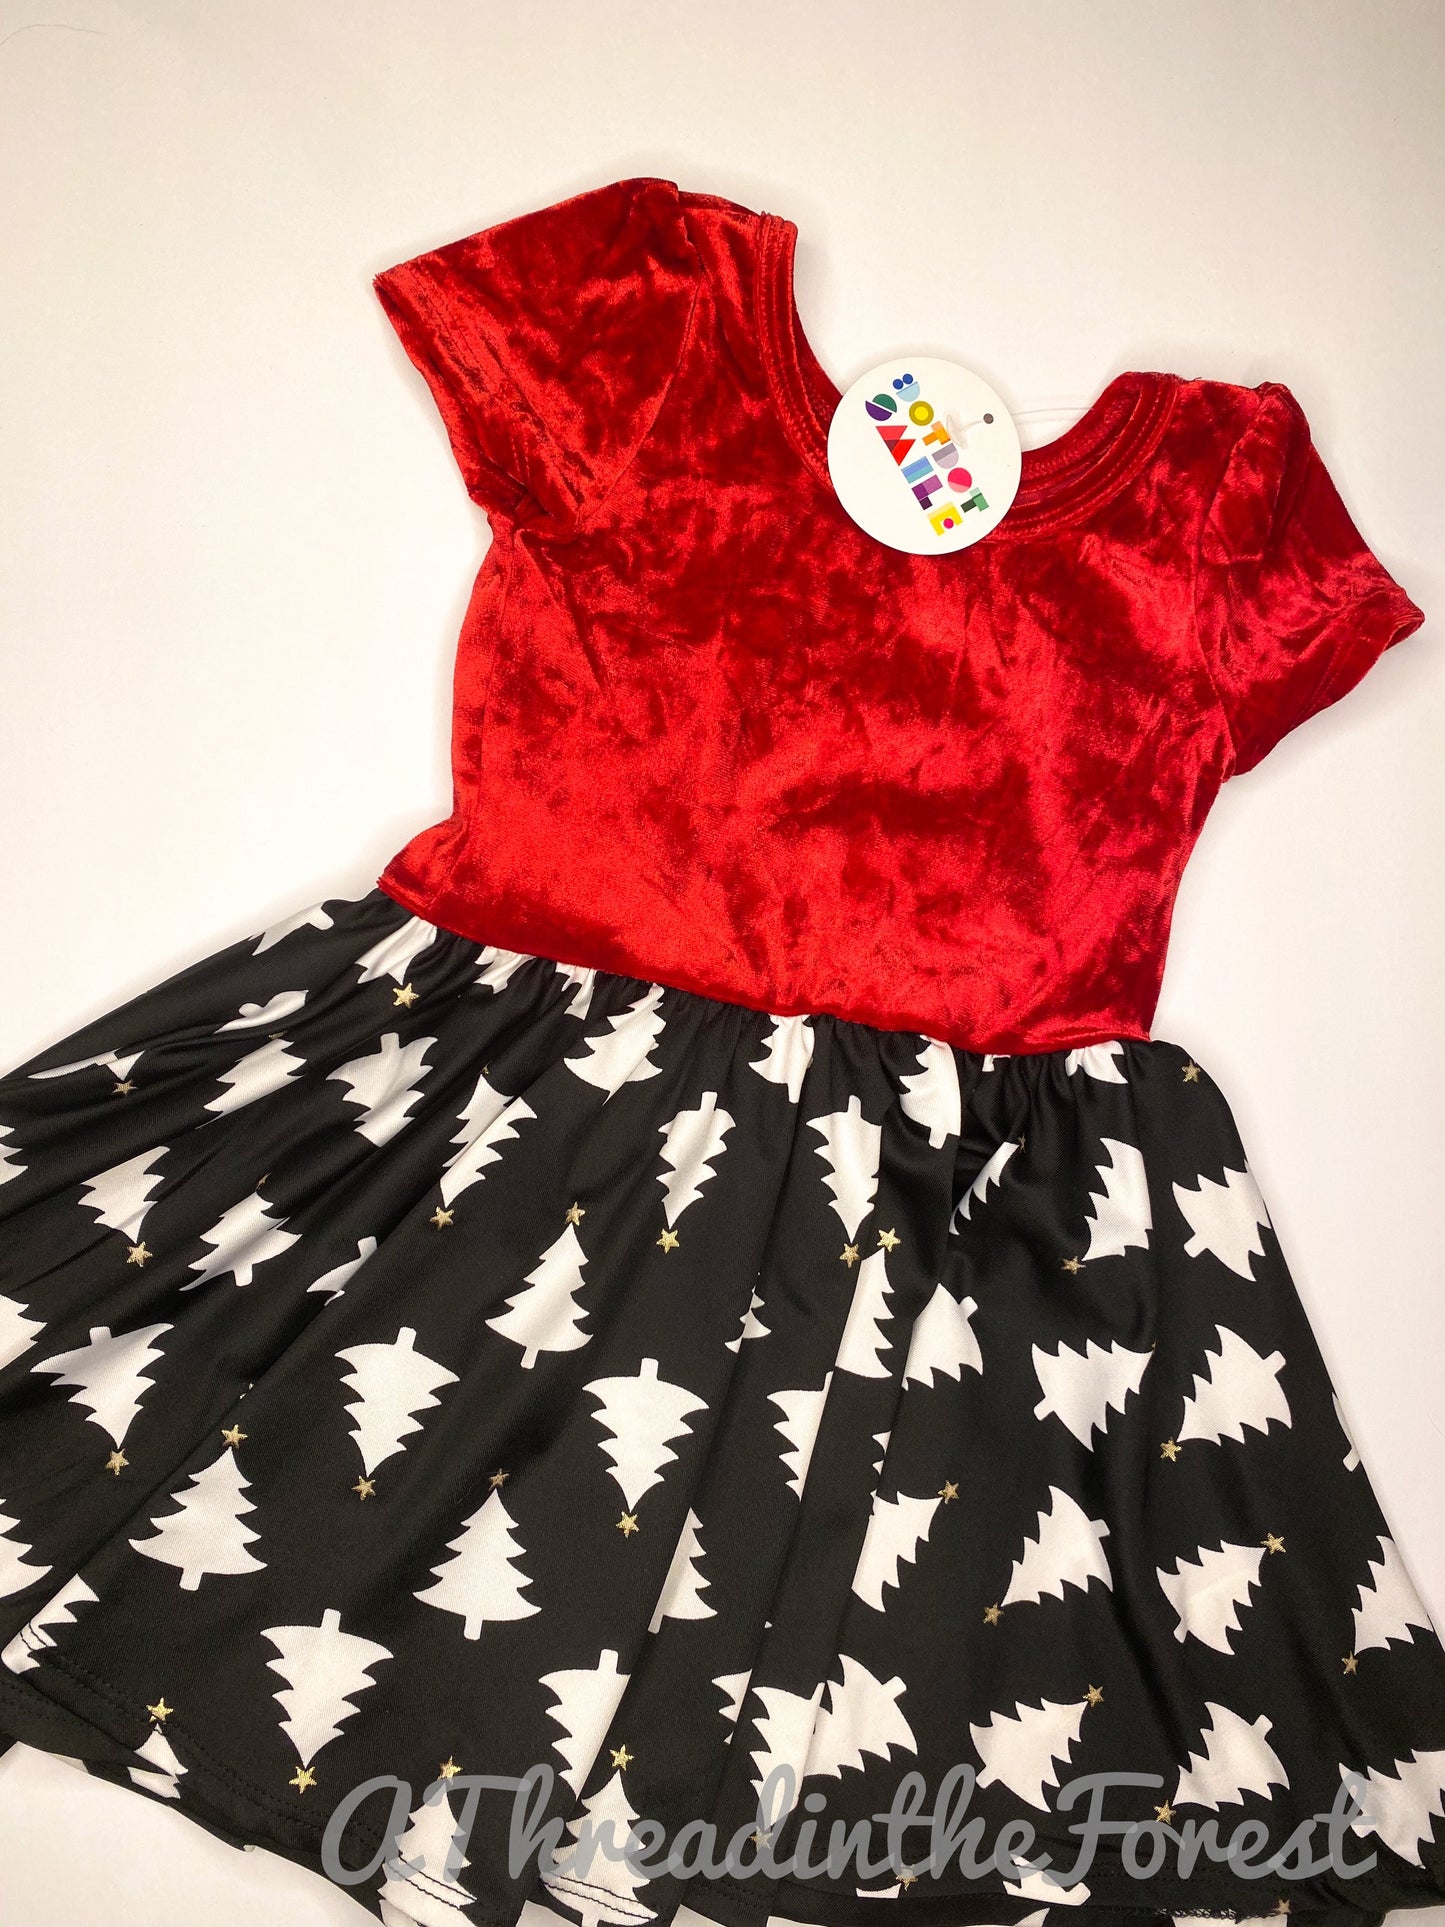 Red Velour and Christmas Tree Print Skirt Size 2T - Fancy Classic Cap Style Dress